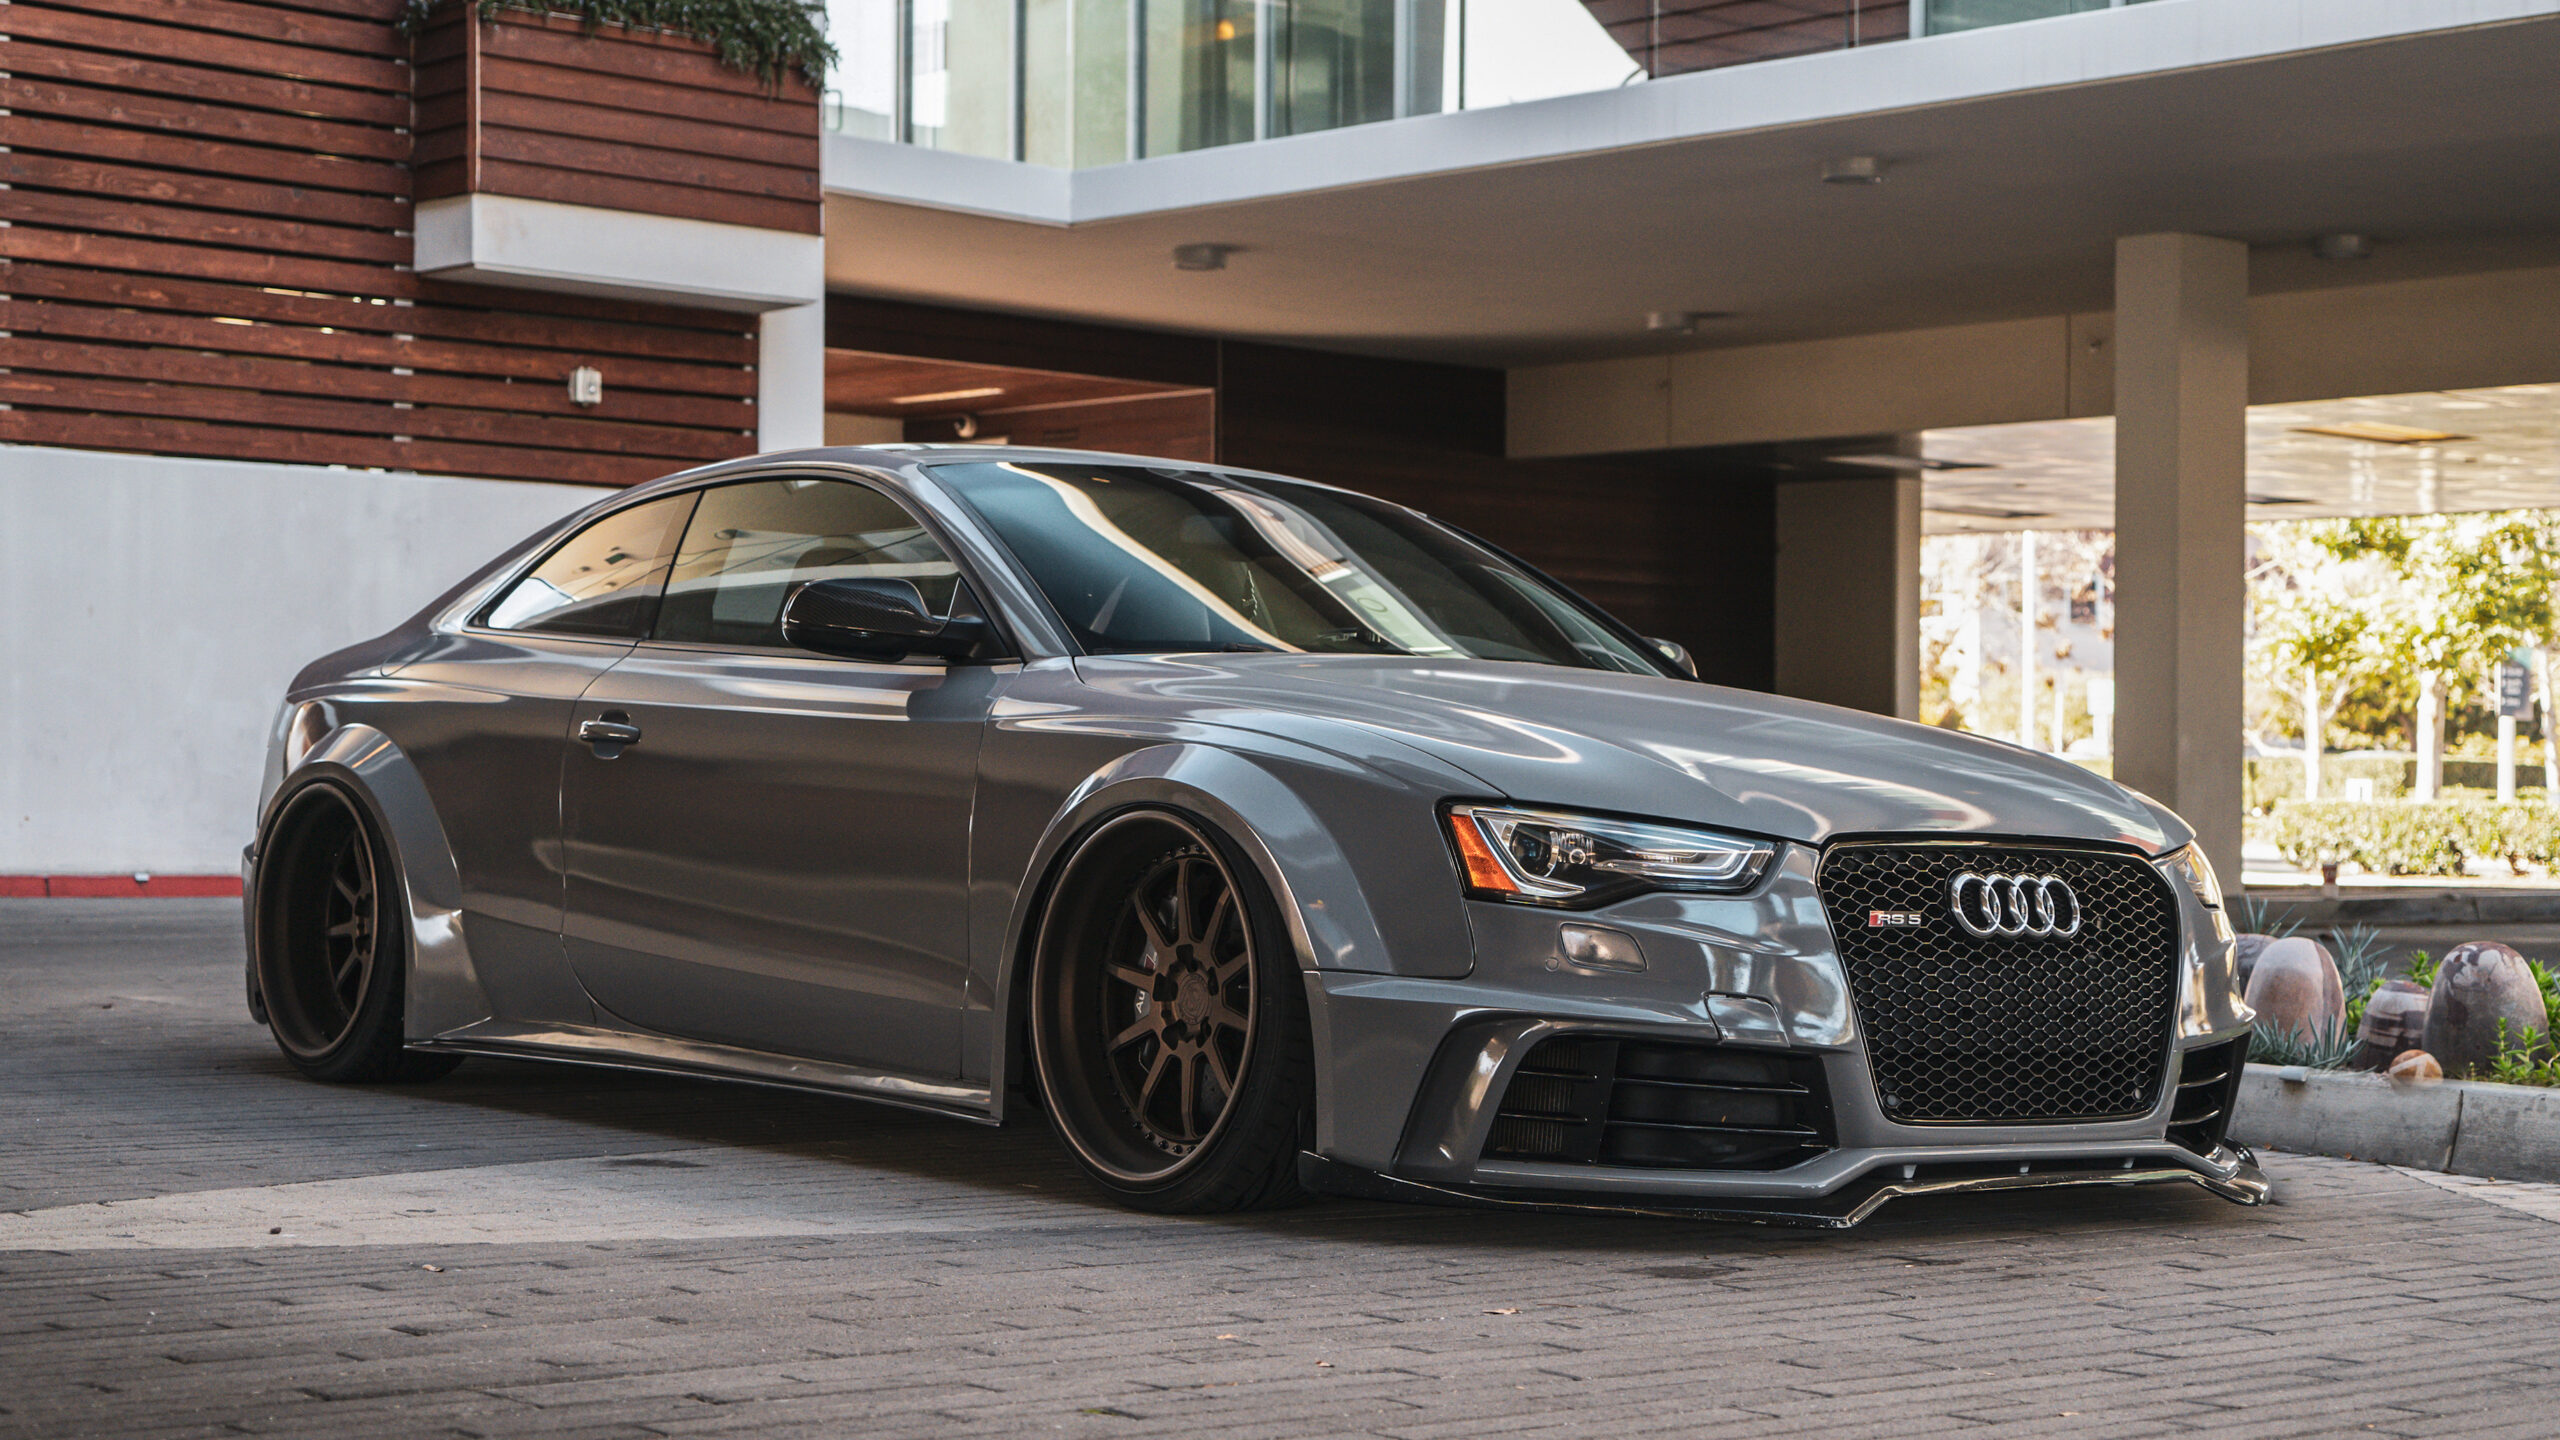 Supercharged Audi RS5 SR66 widebody kit